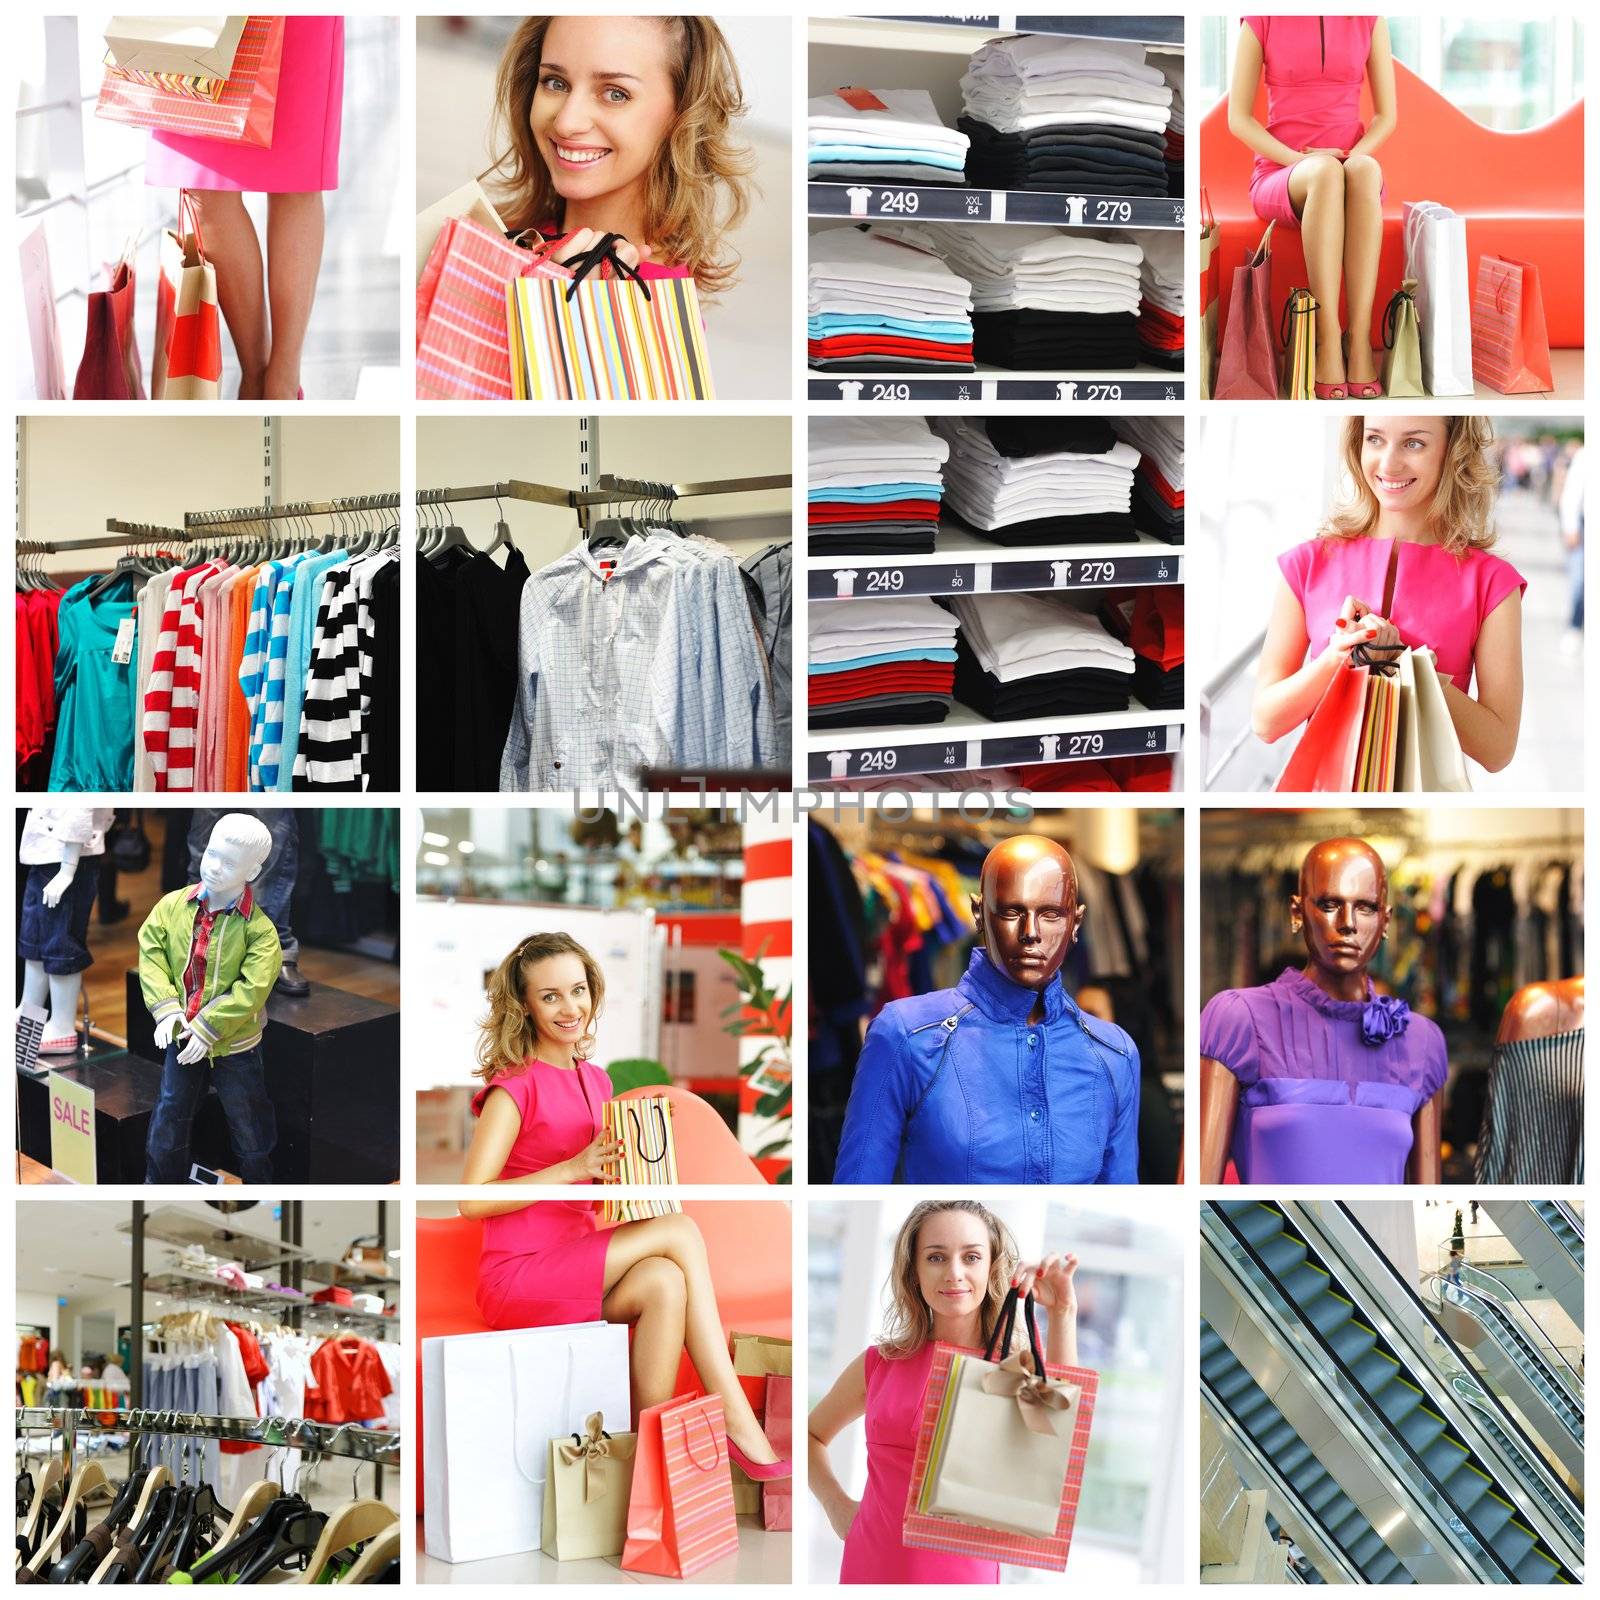 Shopping collage by haveseen